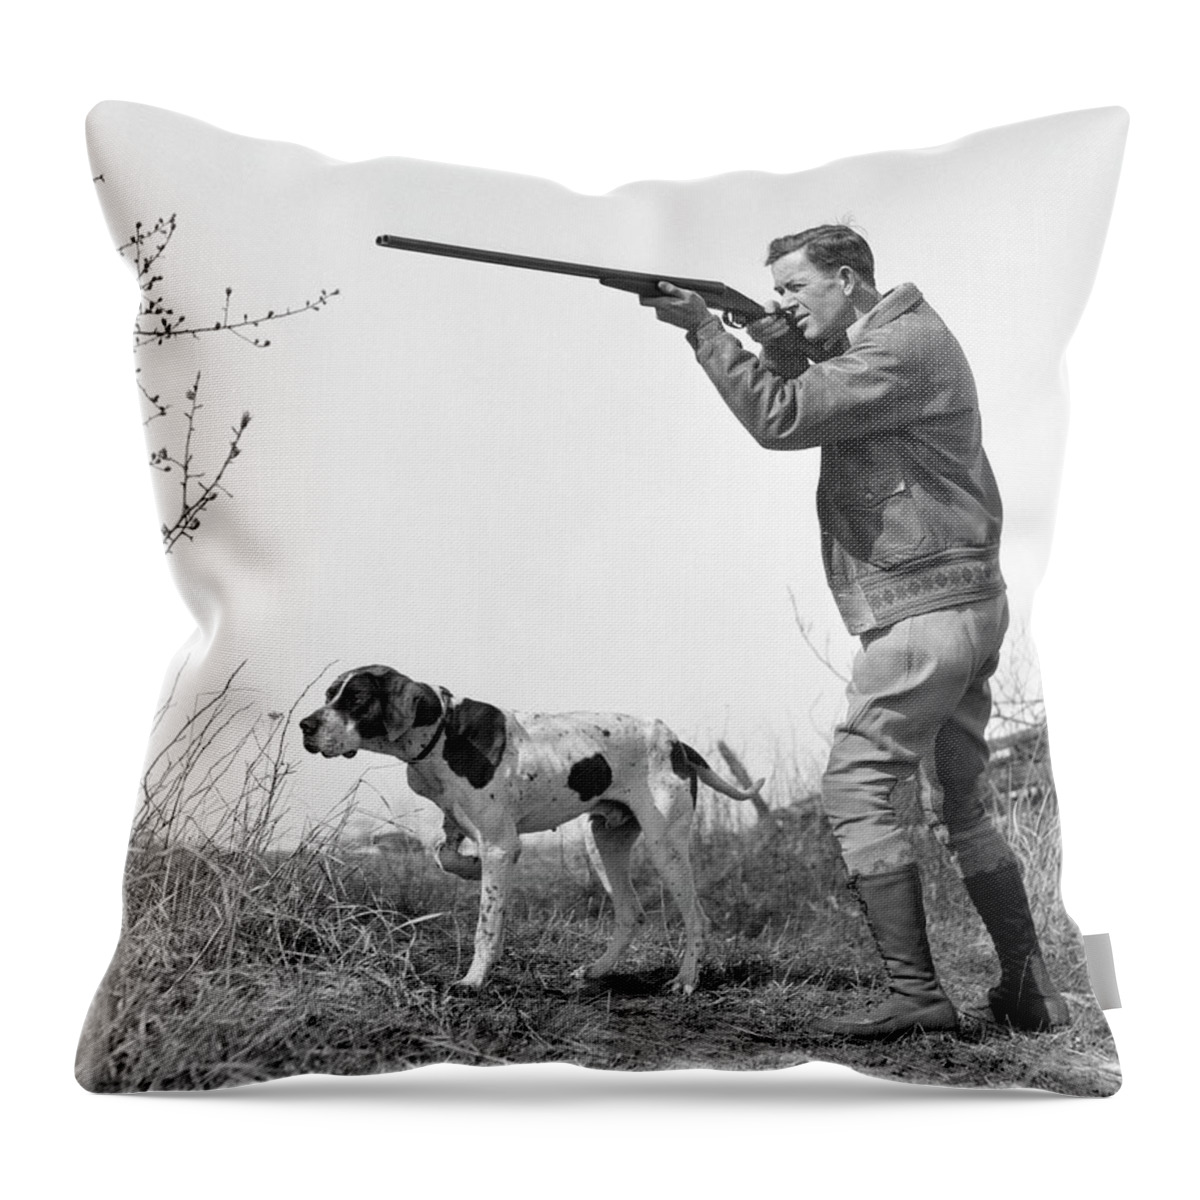 People Throw Pillow featuring the photograph Upland Bird Hunter With Pointer Dog by H. Armstrong Roberts